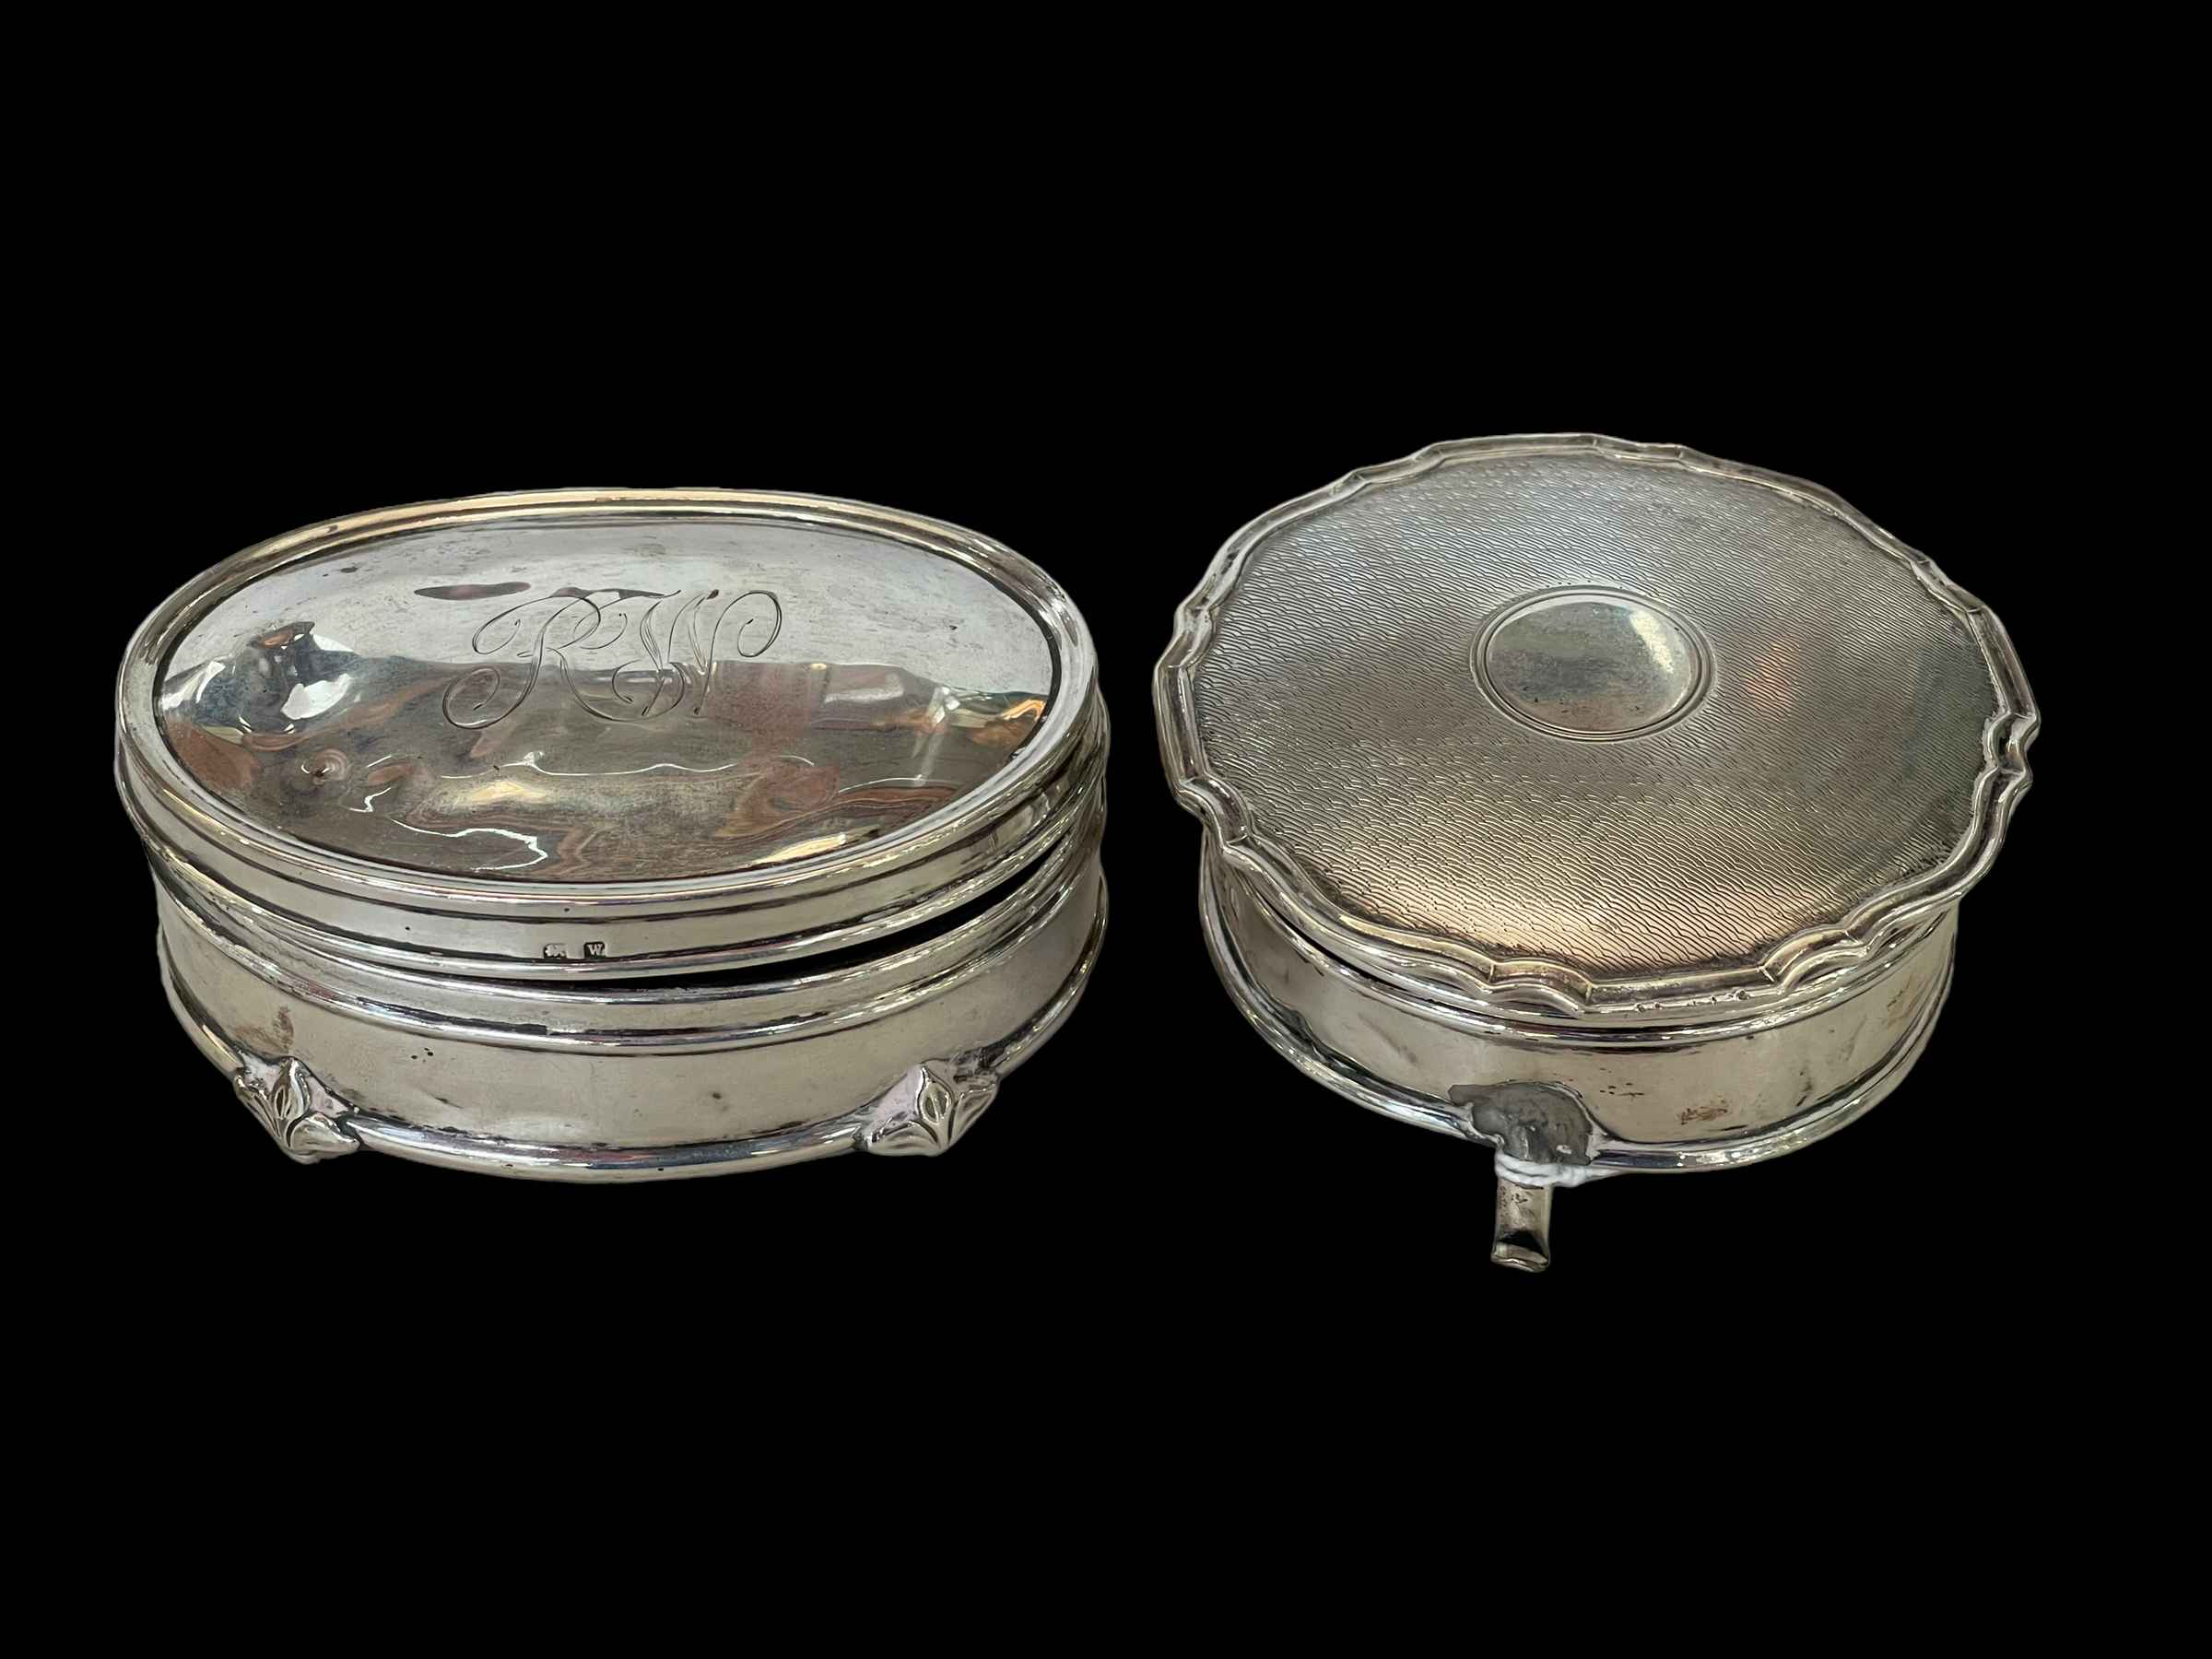 Two silver ring boxes (well worn).